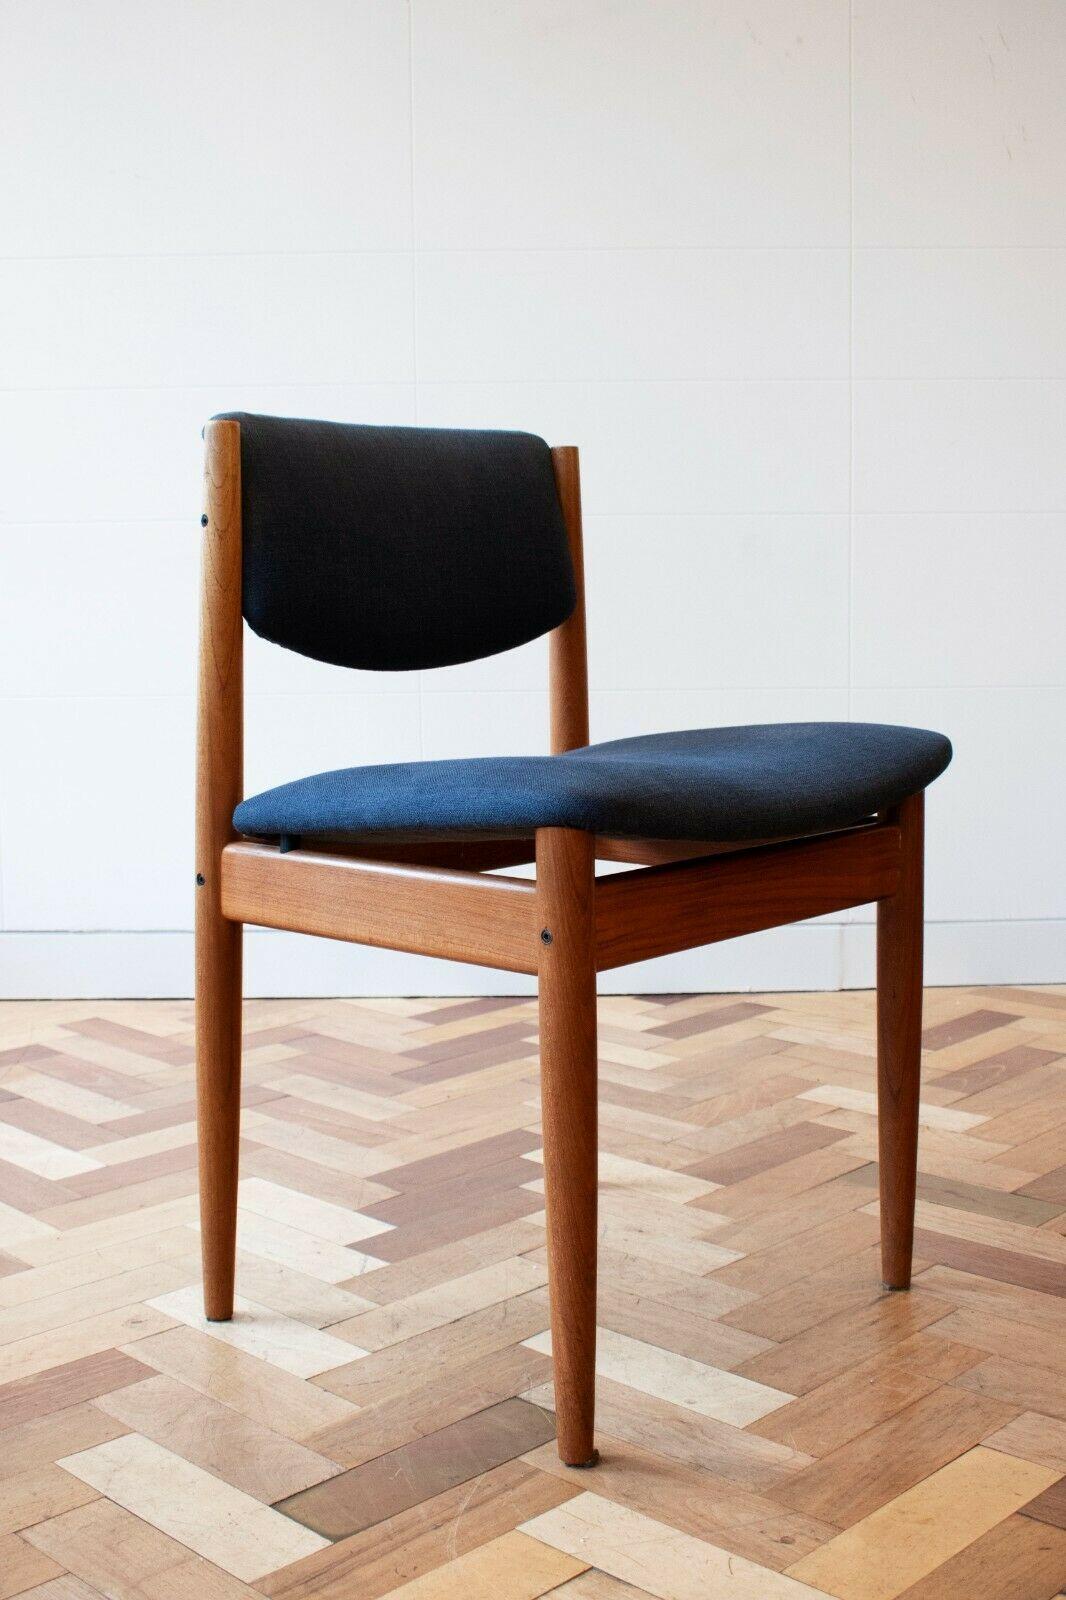 Mid-20th Century Finn Juhl for France & Sons, Teakwood Extendable Dining Table and Chairs, 1960's